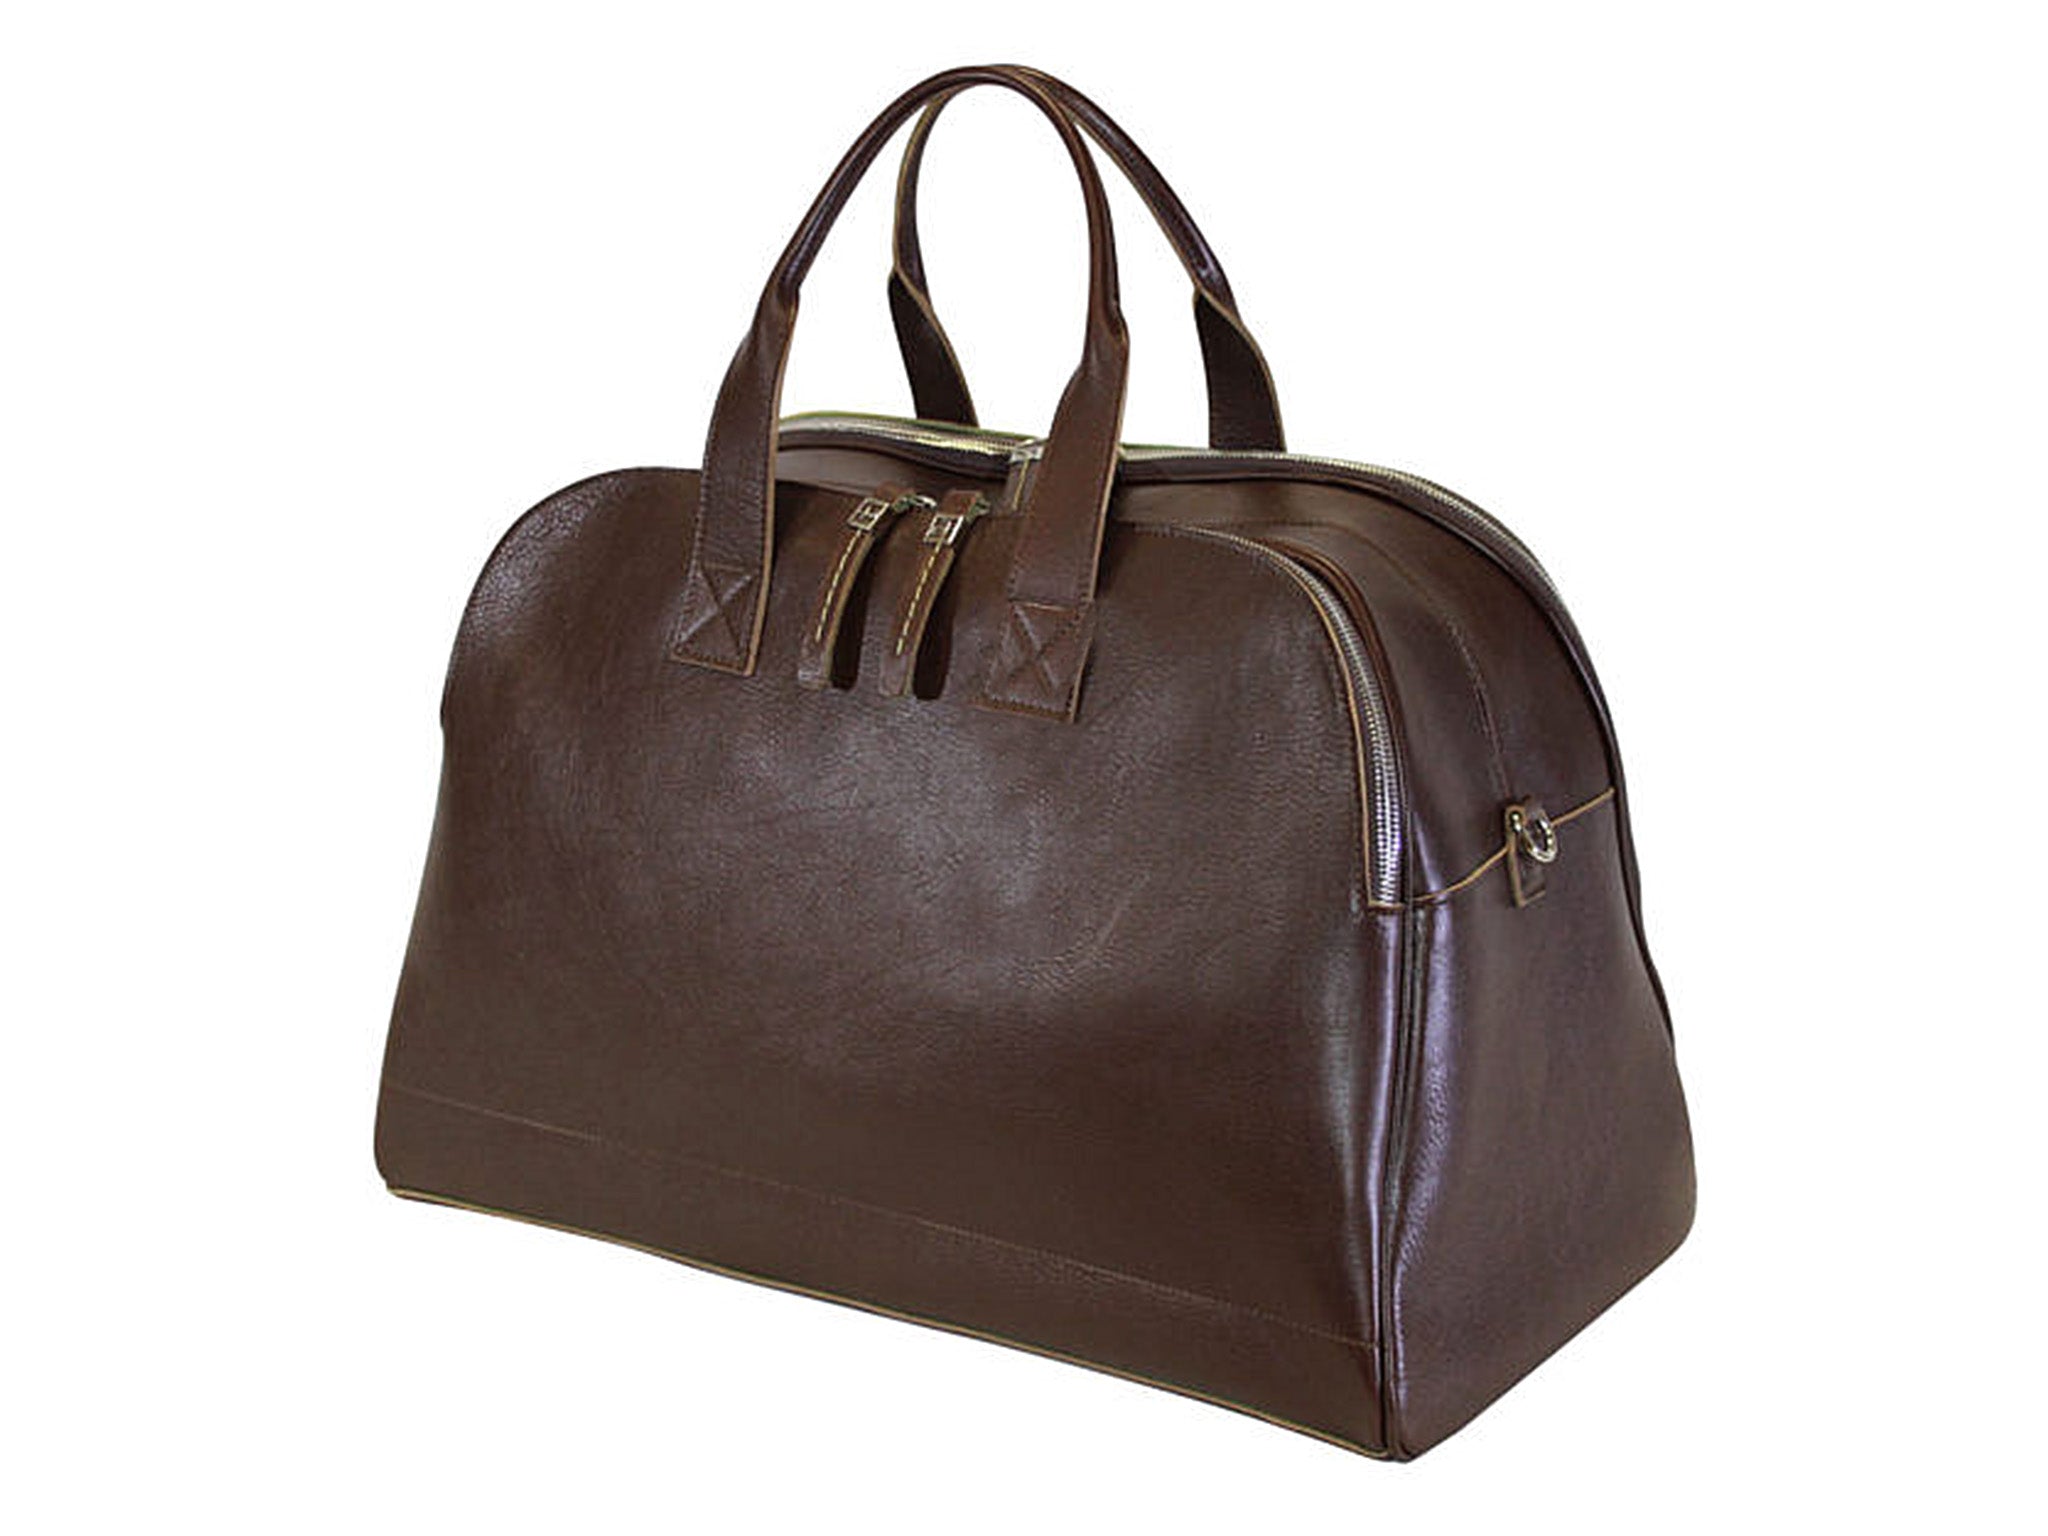 Marco Polo Luxury Travel Bag Brown